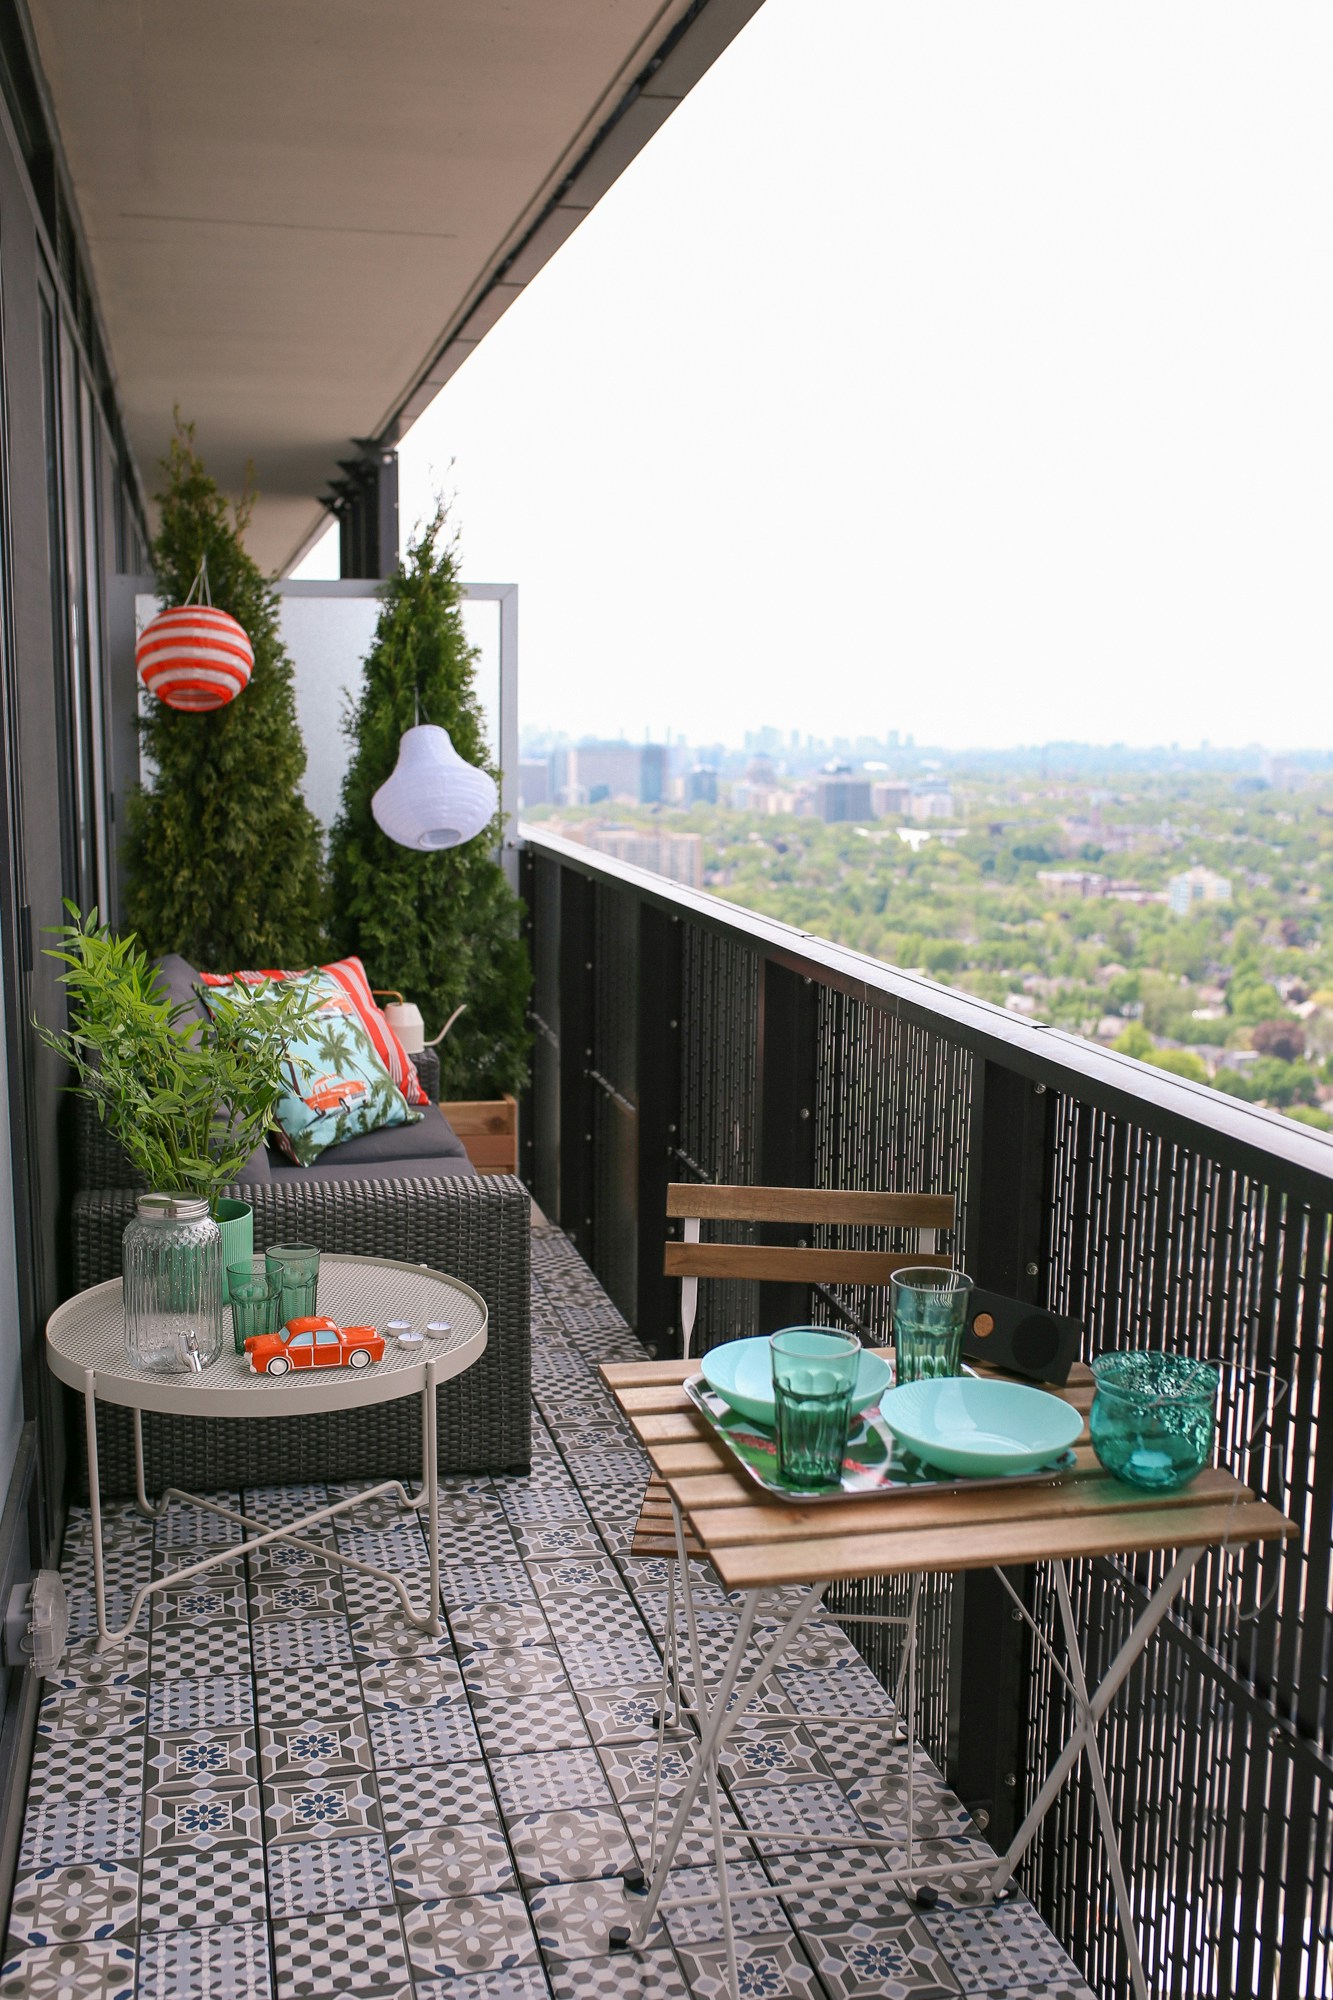 The IKEA Mällsten decking is a must have to personalize your apartment balcony. The Mallsten decking is super easy to install and is made of real porcelain tiles! It feels like I'm in Morocco or Lisbon!